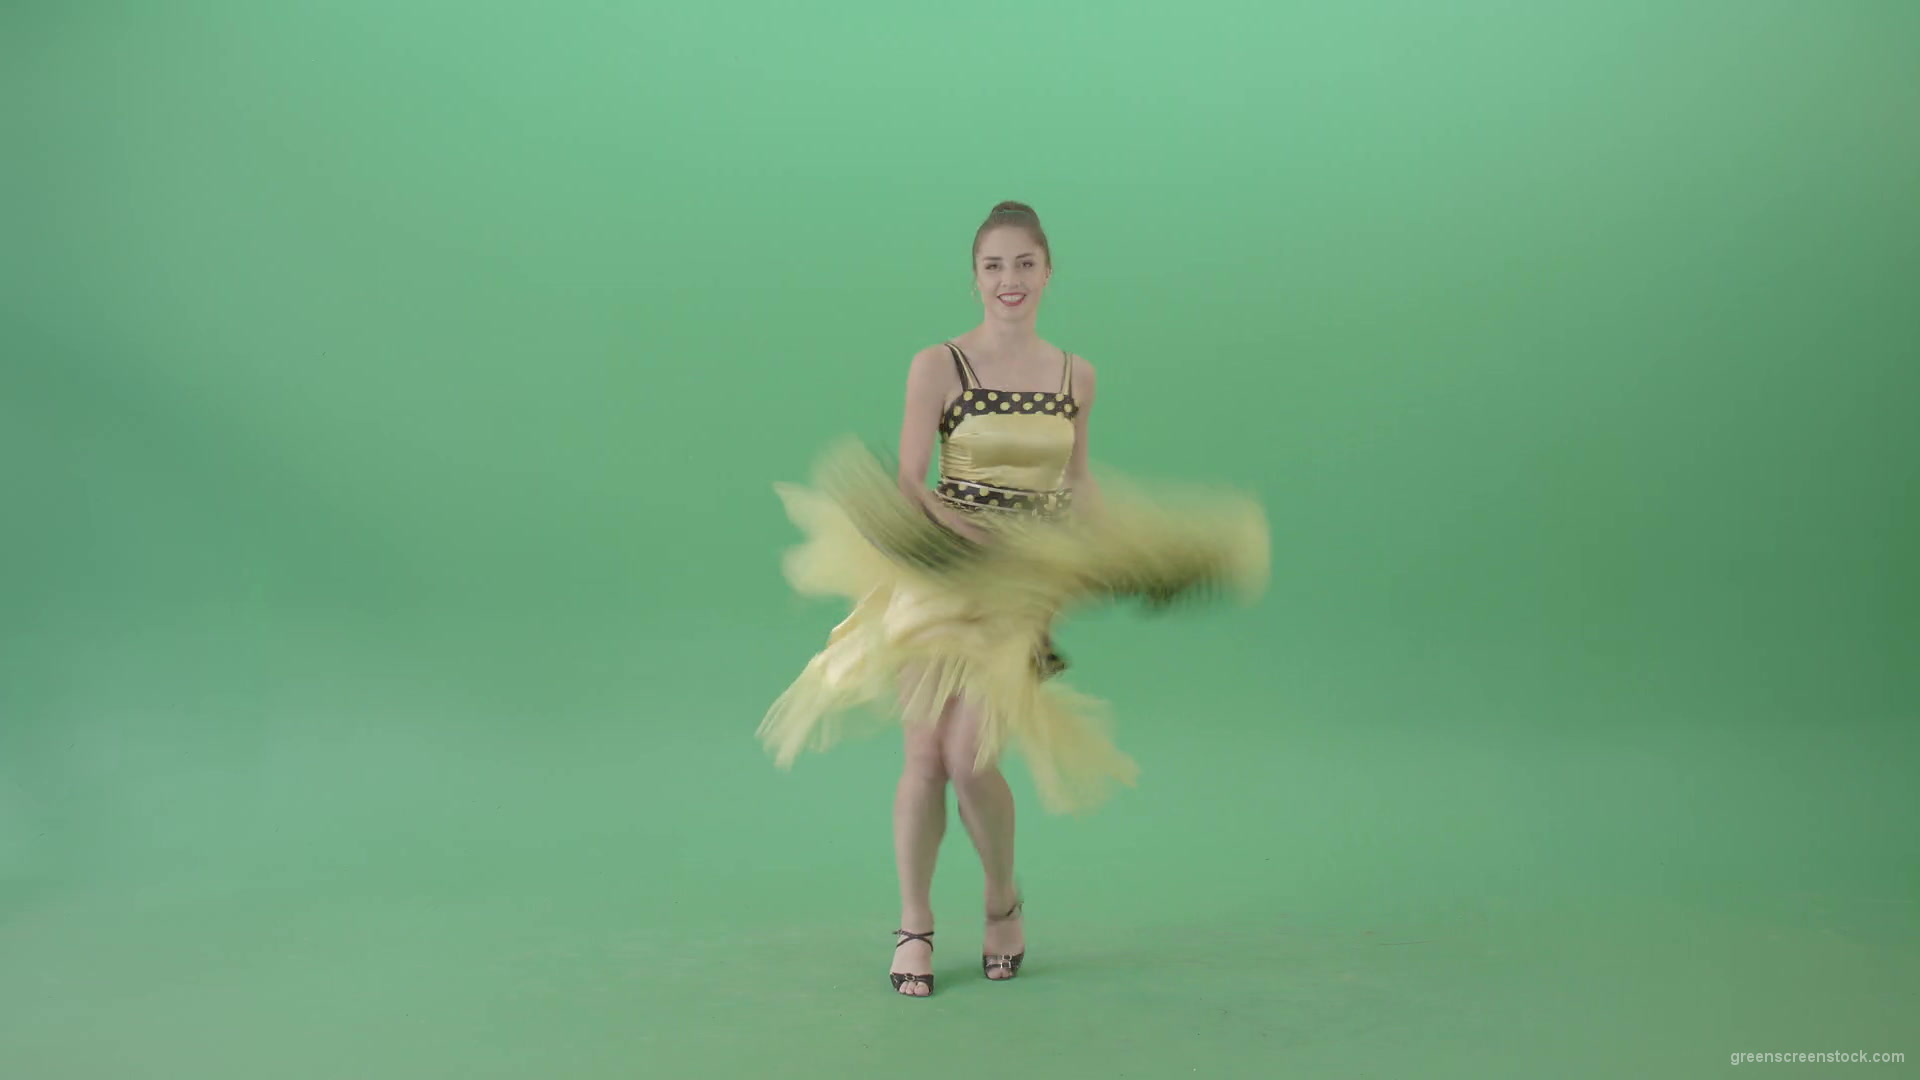 Beautiful-Woman-dancing-Boogie-woogie-and-jumping-in-Jazz-dance-isolated-on-Green-Screen-4K-Video-Footage-1920_006 Green Screen Stock